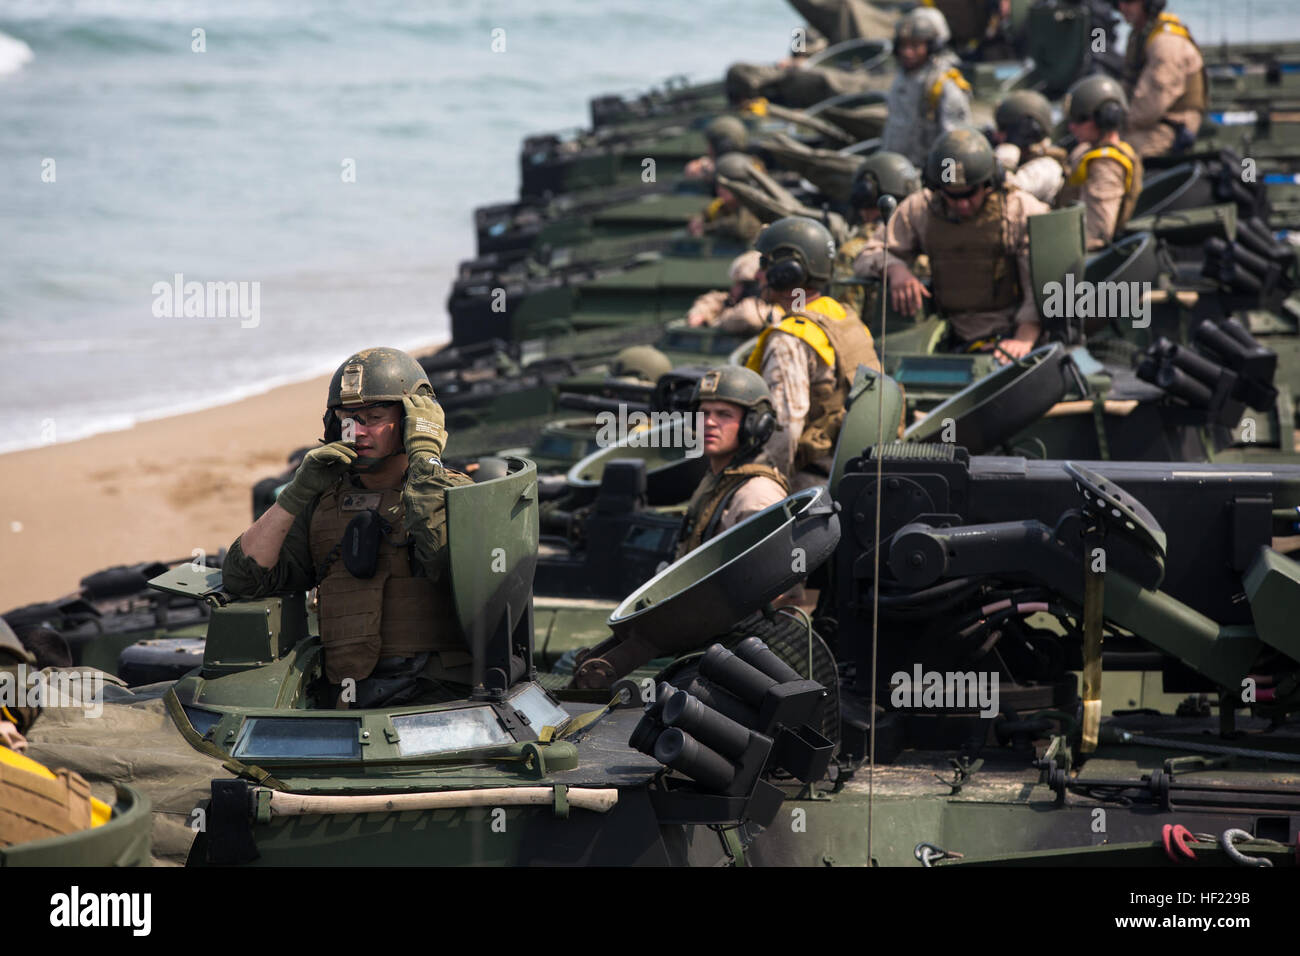 U.S. Marines with the 2nd Battalion, 3rd Marine Regiment, attached to the 4th Marine Regiment, line up in assault amphibious vehicles at Dogu Beach in Pohang, South Korea, April 1, 2014, during Ssang Yong 14 as part of Marine Expeditionary Force Exercise (MEFEX) 2014. MEFEX 2014 was a U.S. Marine Corps Forces Pacific-sponsored series of exercises between the U.S. Navy and Marine Corps and South Korean forces. Among the exercises were the Korean Marine Exchange Program, Freedom Banner 14, Ssang Yong 14, Key Resolve 14 and the Combined Marine Component Command 14 command post exercise. (DoD phot Stock Photo